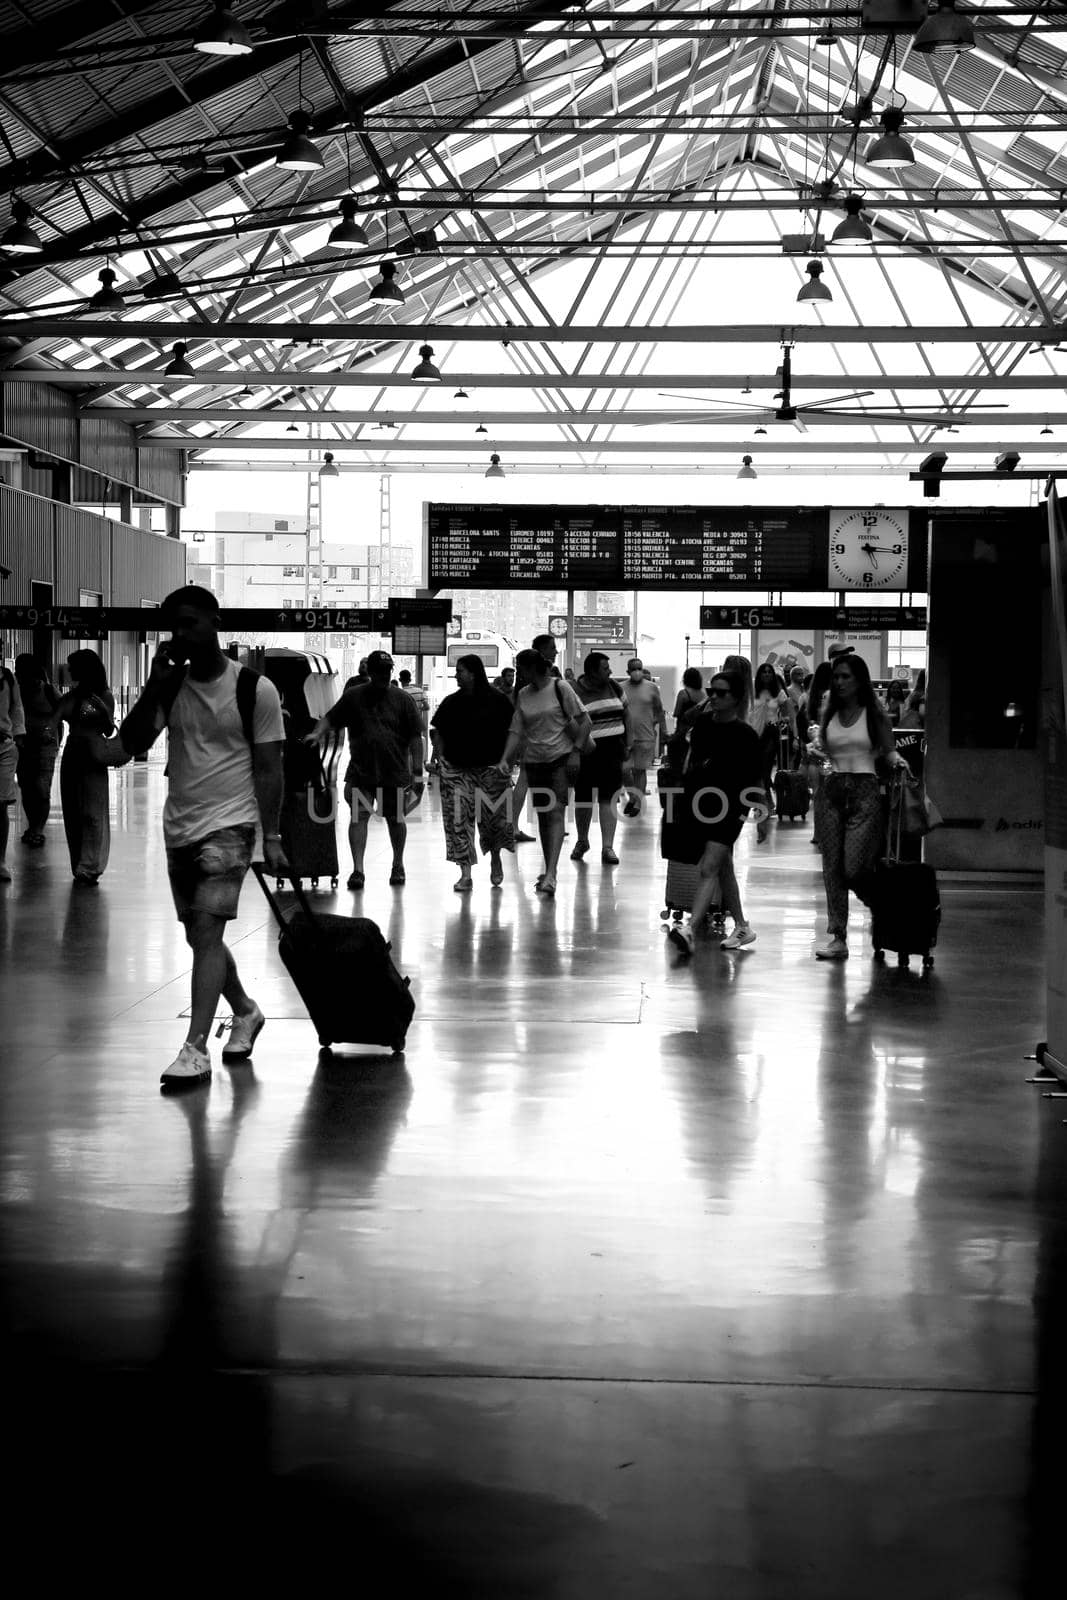 Alicante, Spain- June 24, 2022:Passengers walking through the train station of Alicante with suitcases